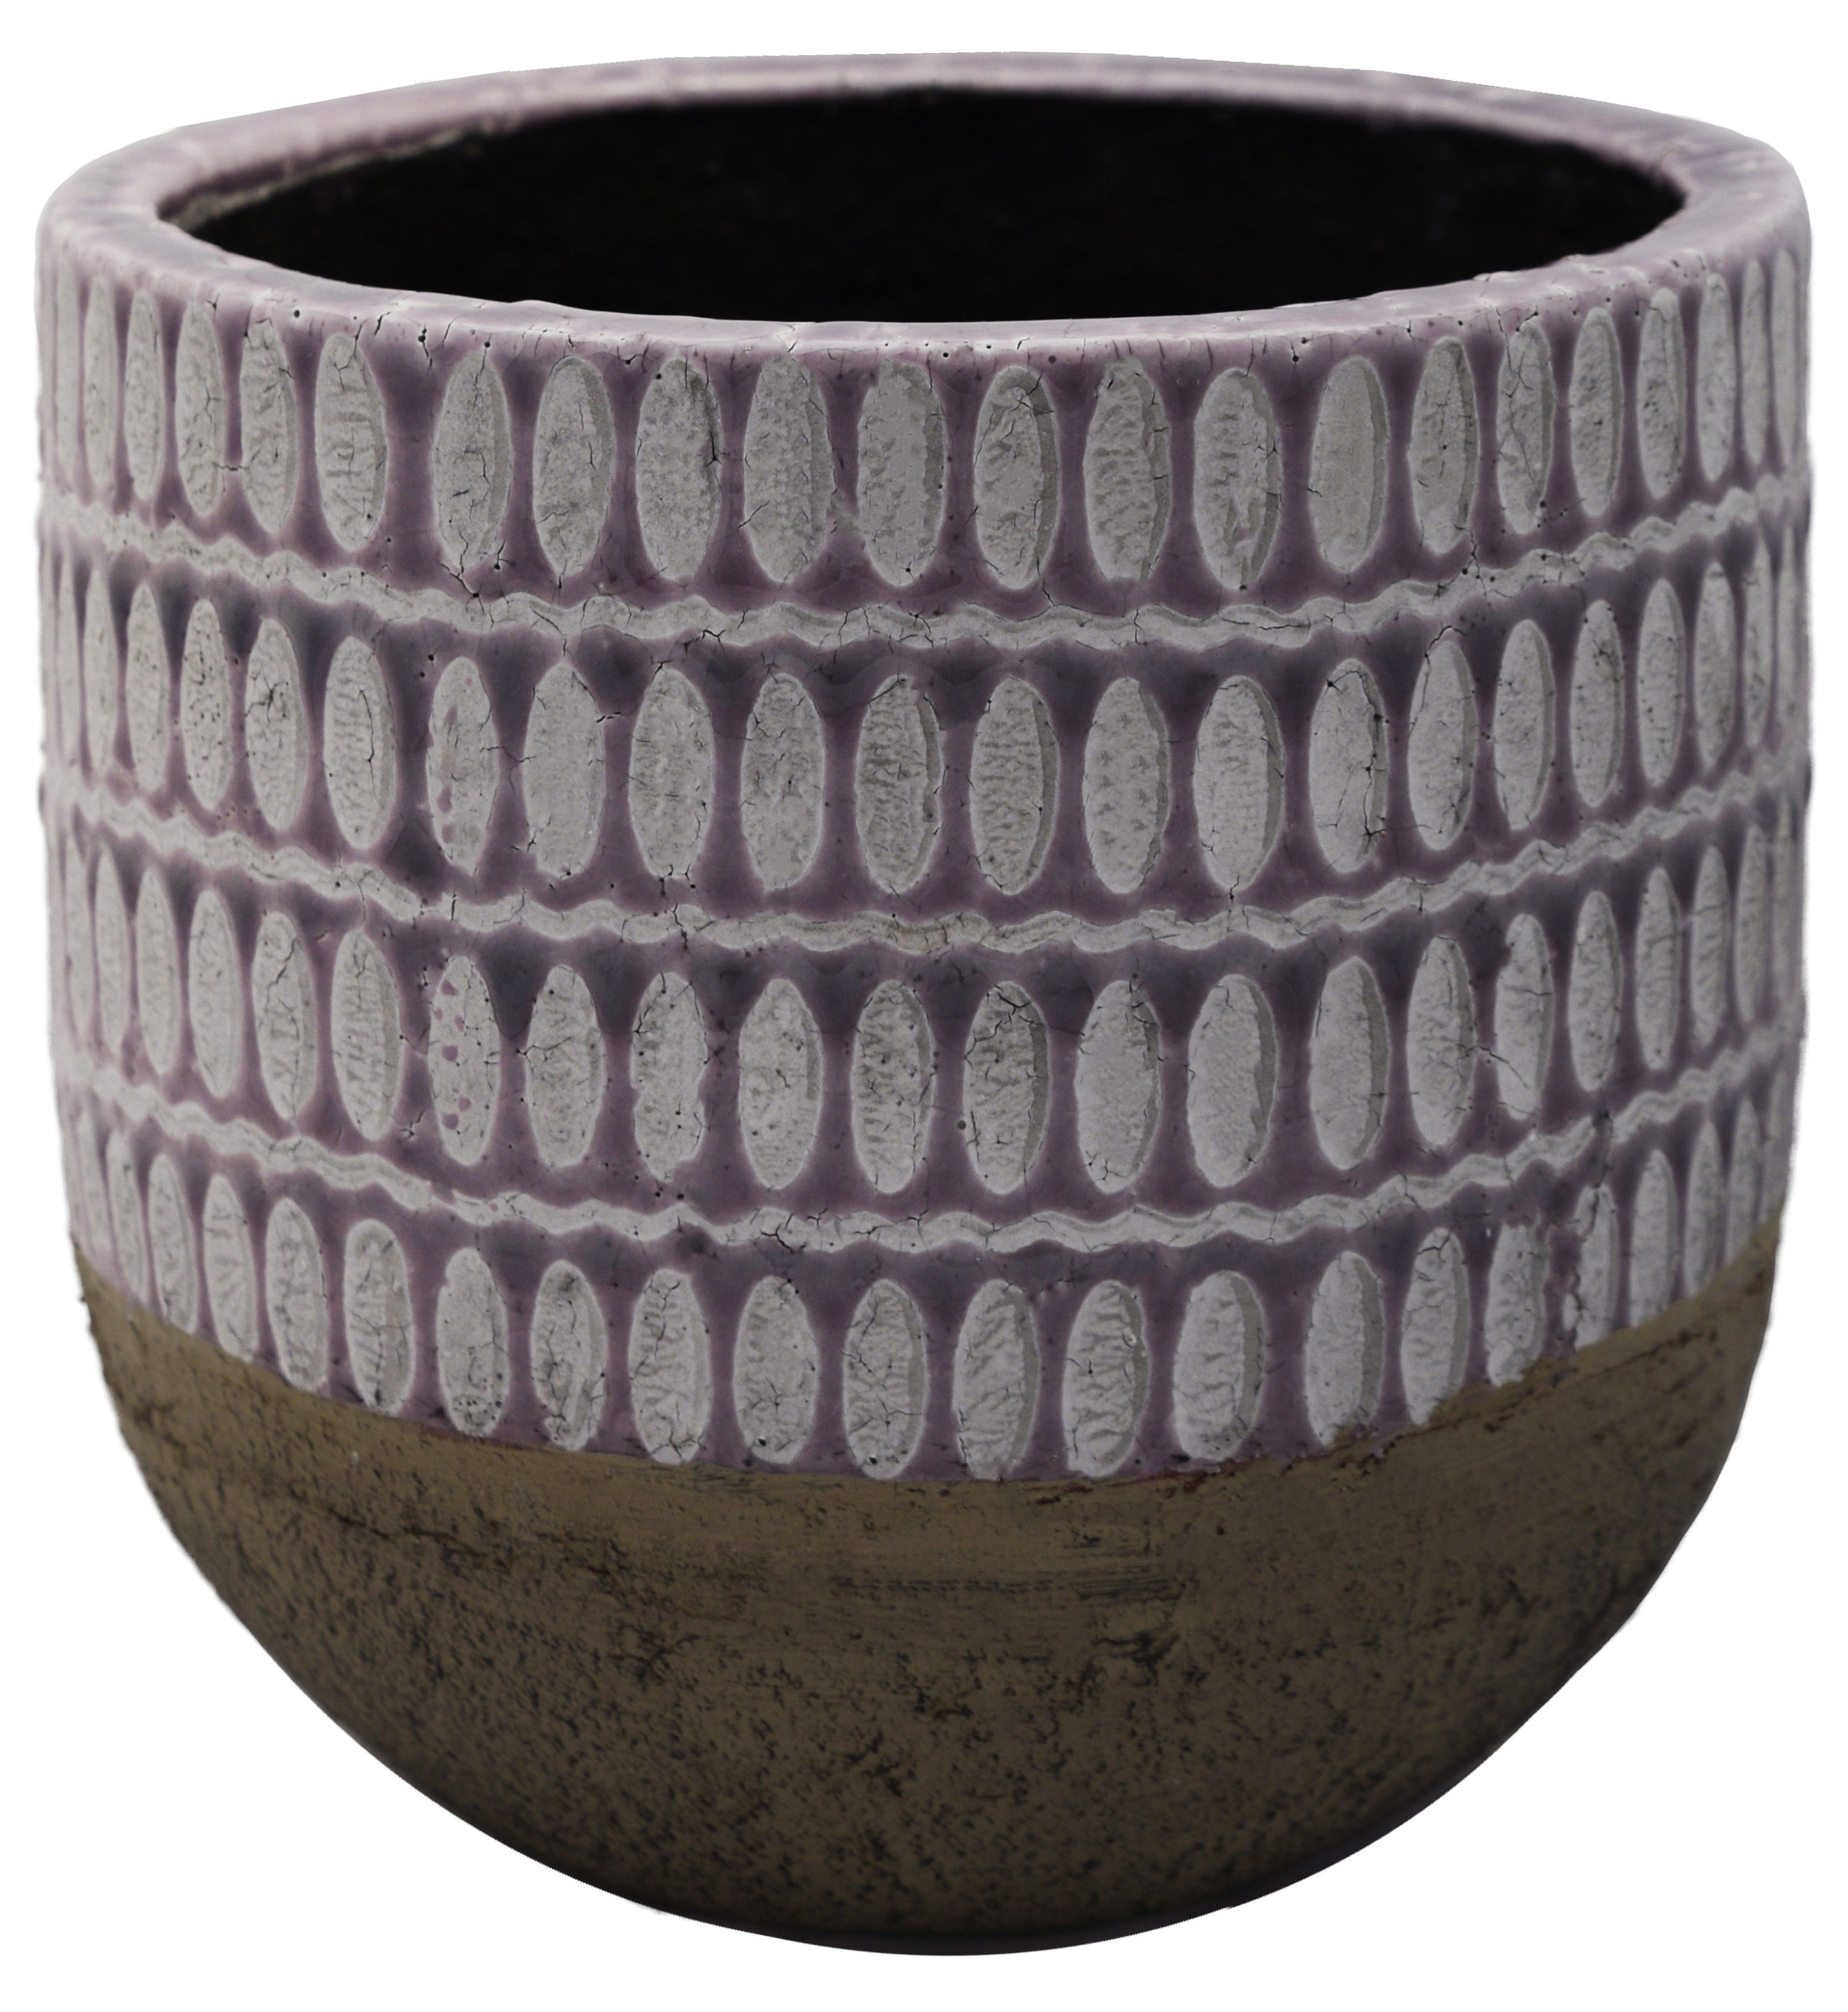 Purple Patterned Cement Planter on White Background